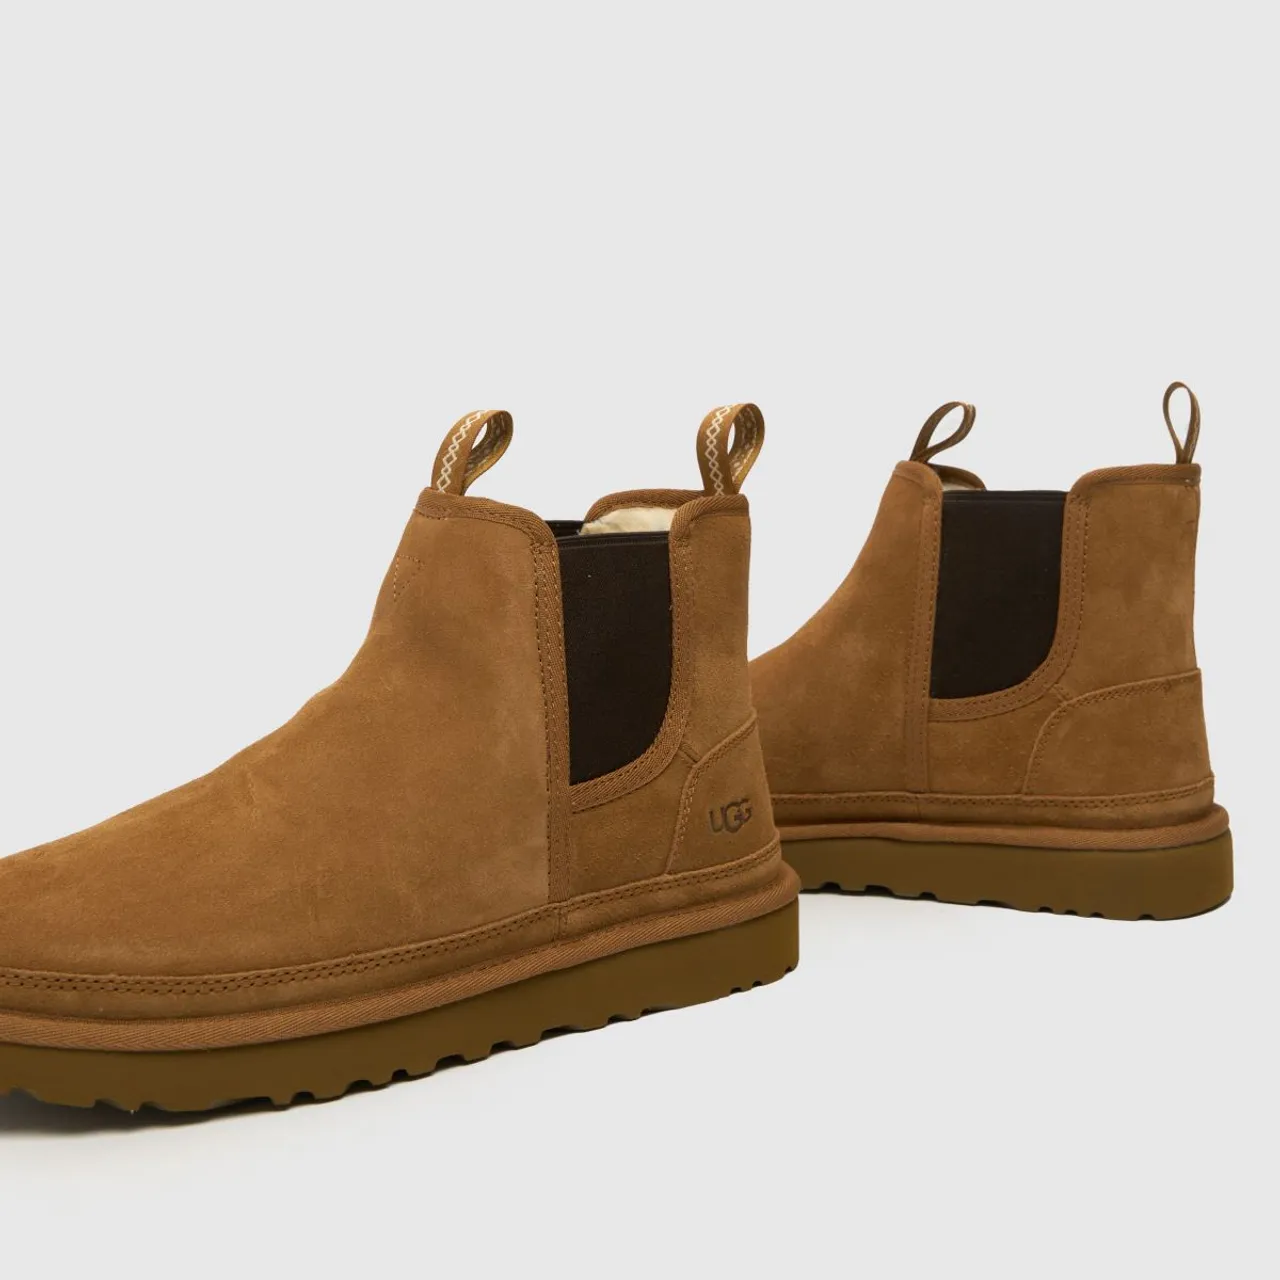 Ugg Neumel Chelsea Boots In Tan